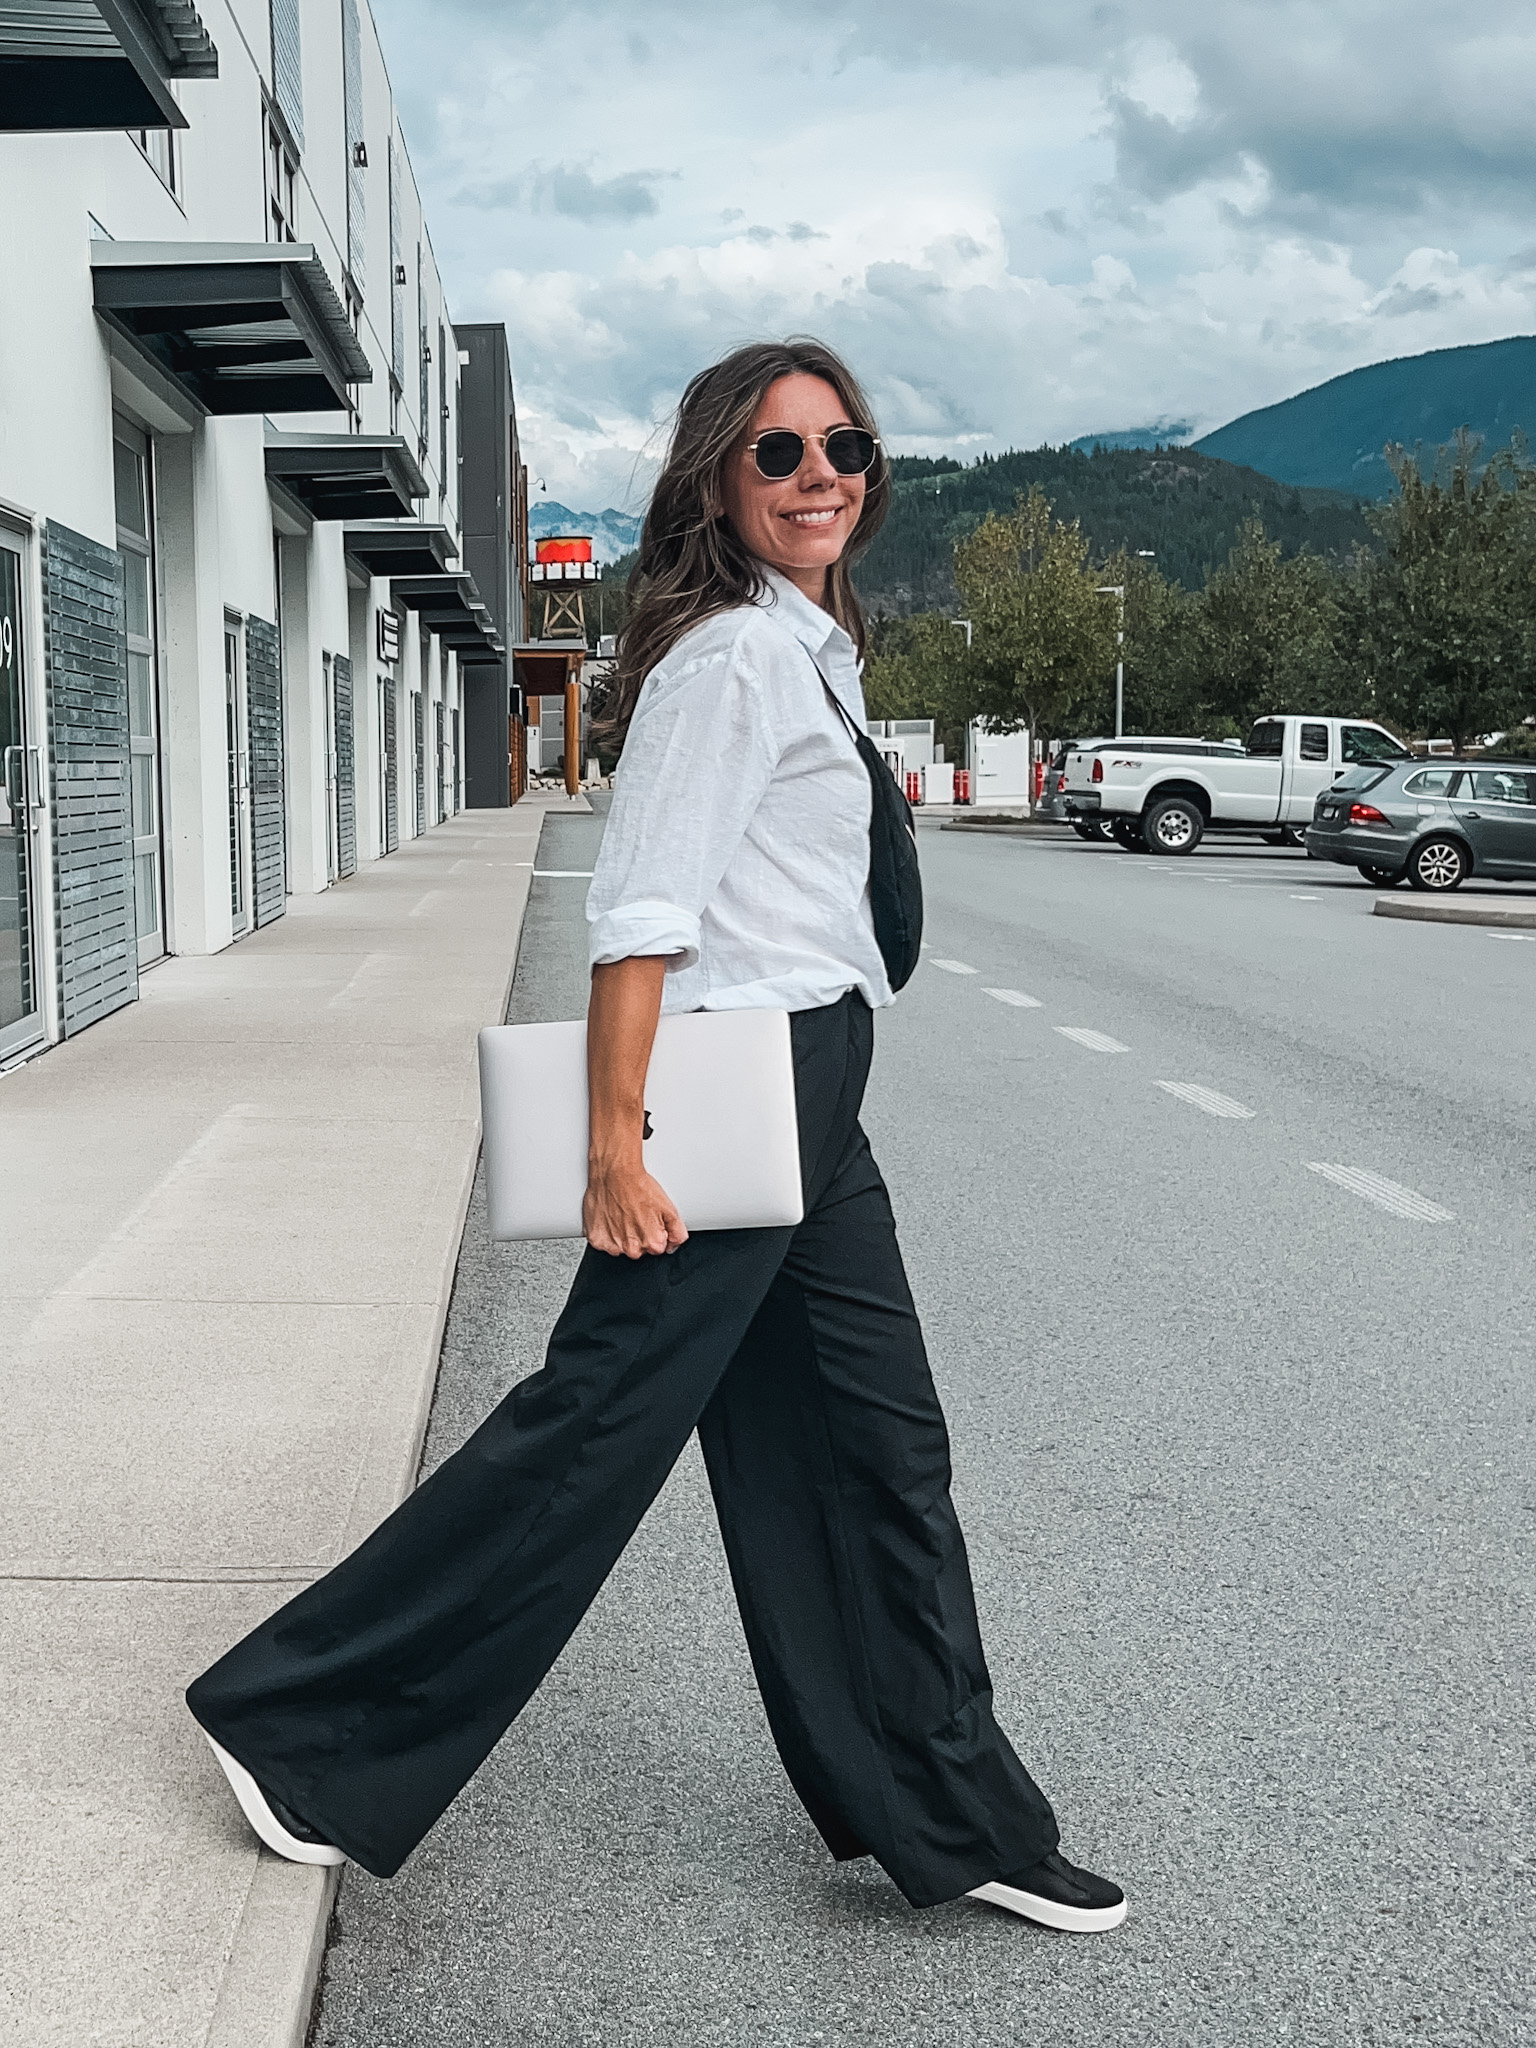 Work Outfit Idea: Printed Pants, a Floaty Blouse, and Low-Heeled Shoes